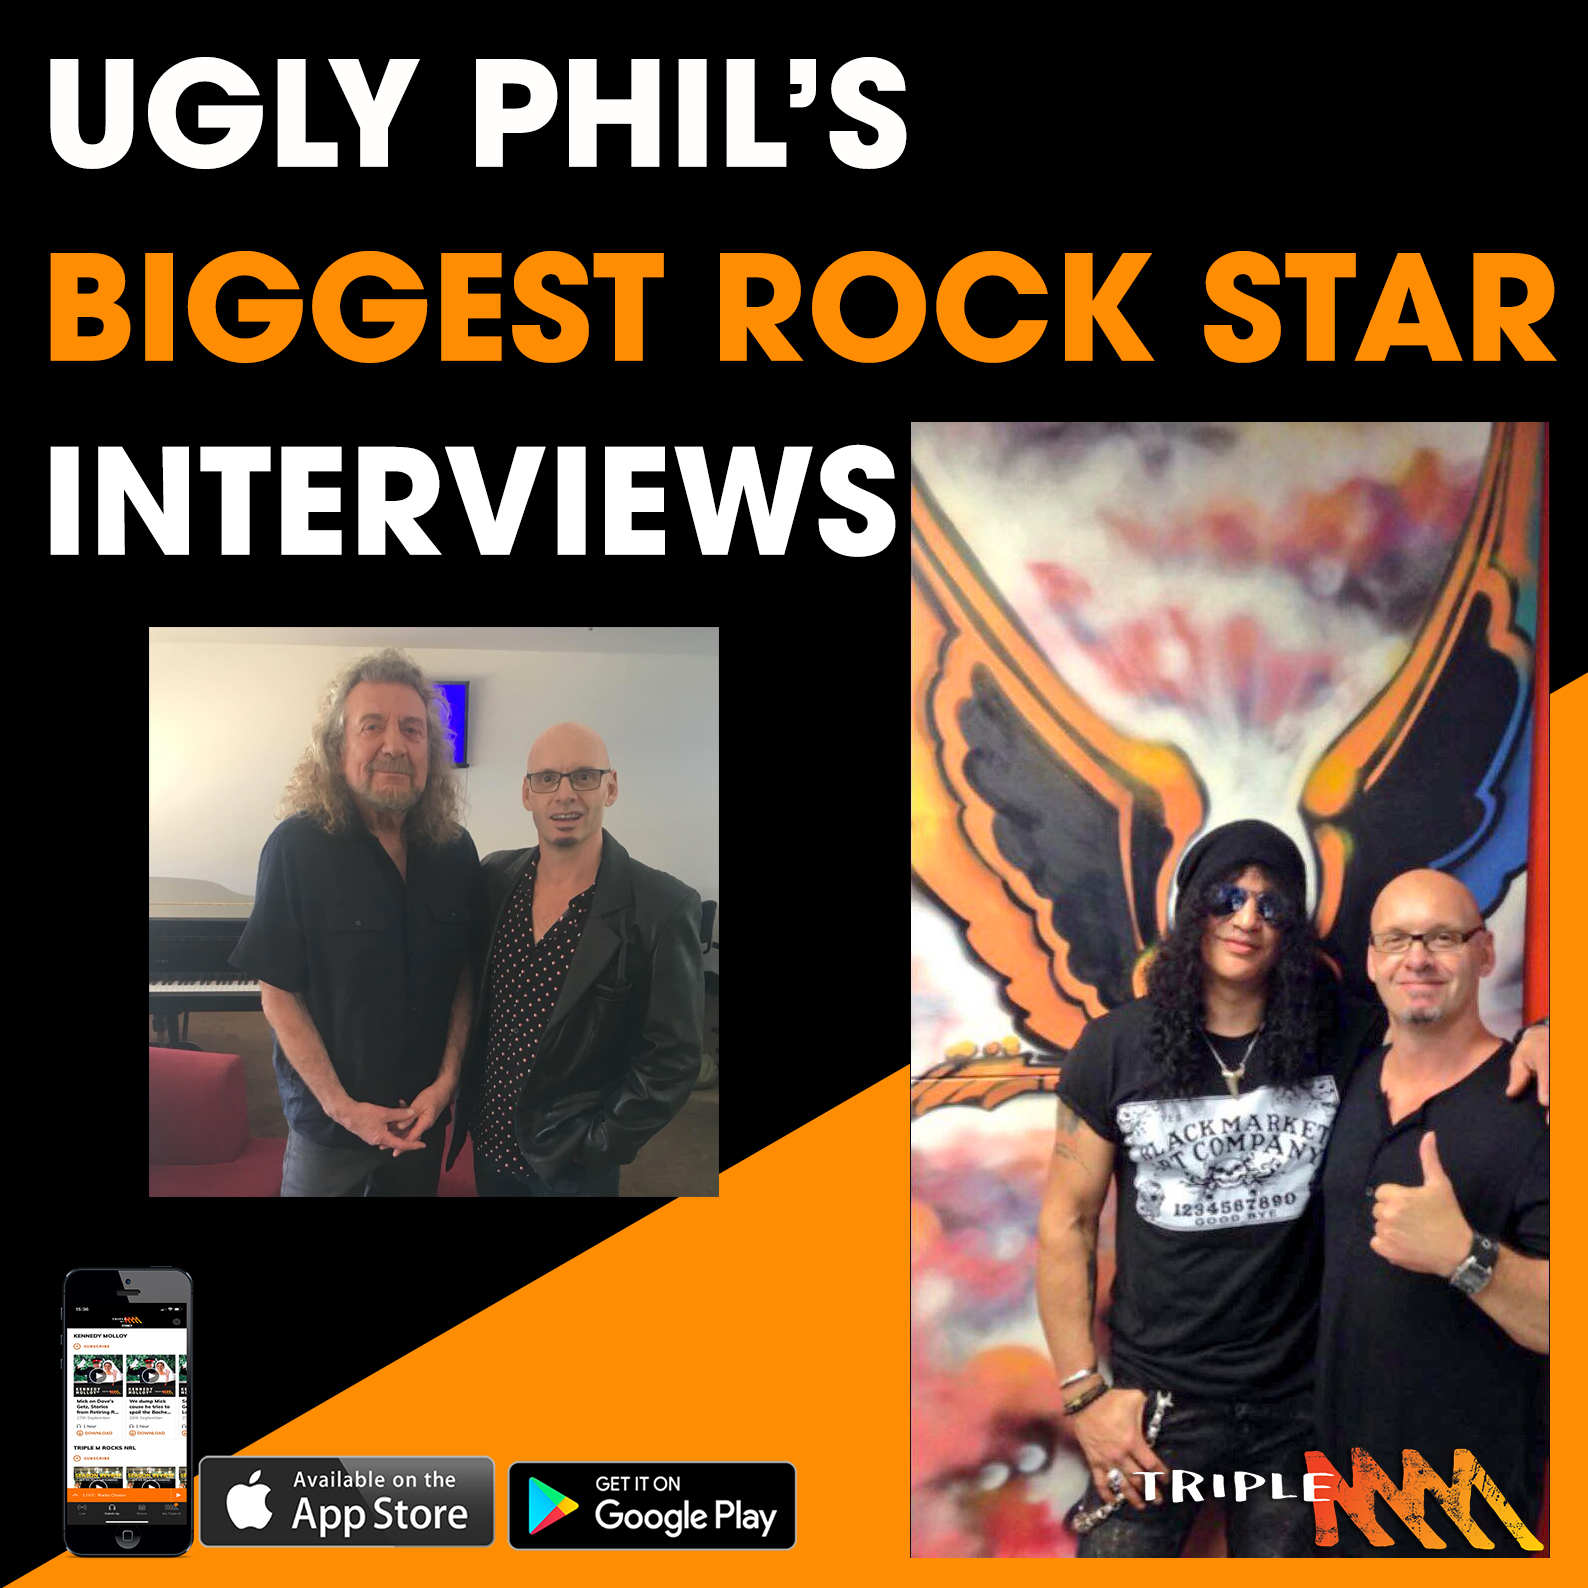 Creativity with Robert Plant, the gift Phil stole for Slash, how Sharon Osbourne treated Motley Crue on the Ozzy Osbourne tour- catch up on Ugly Phil's BIGGEST rock interviews.